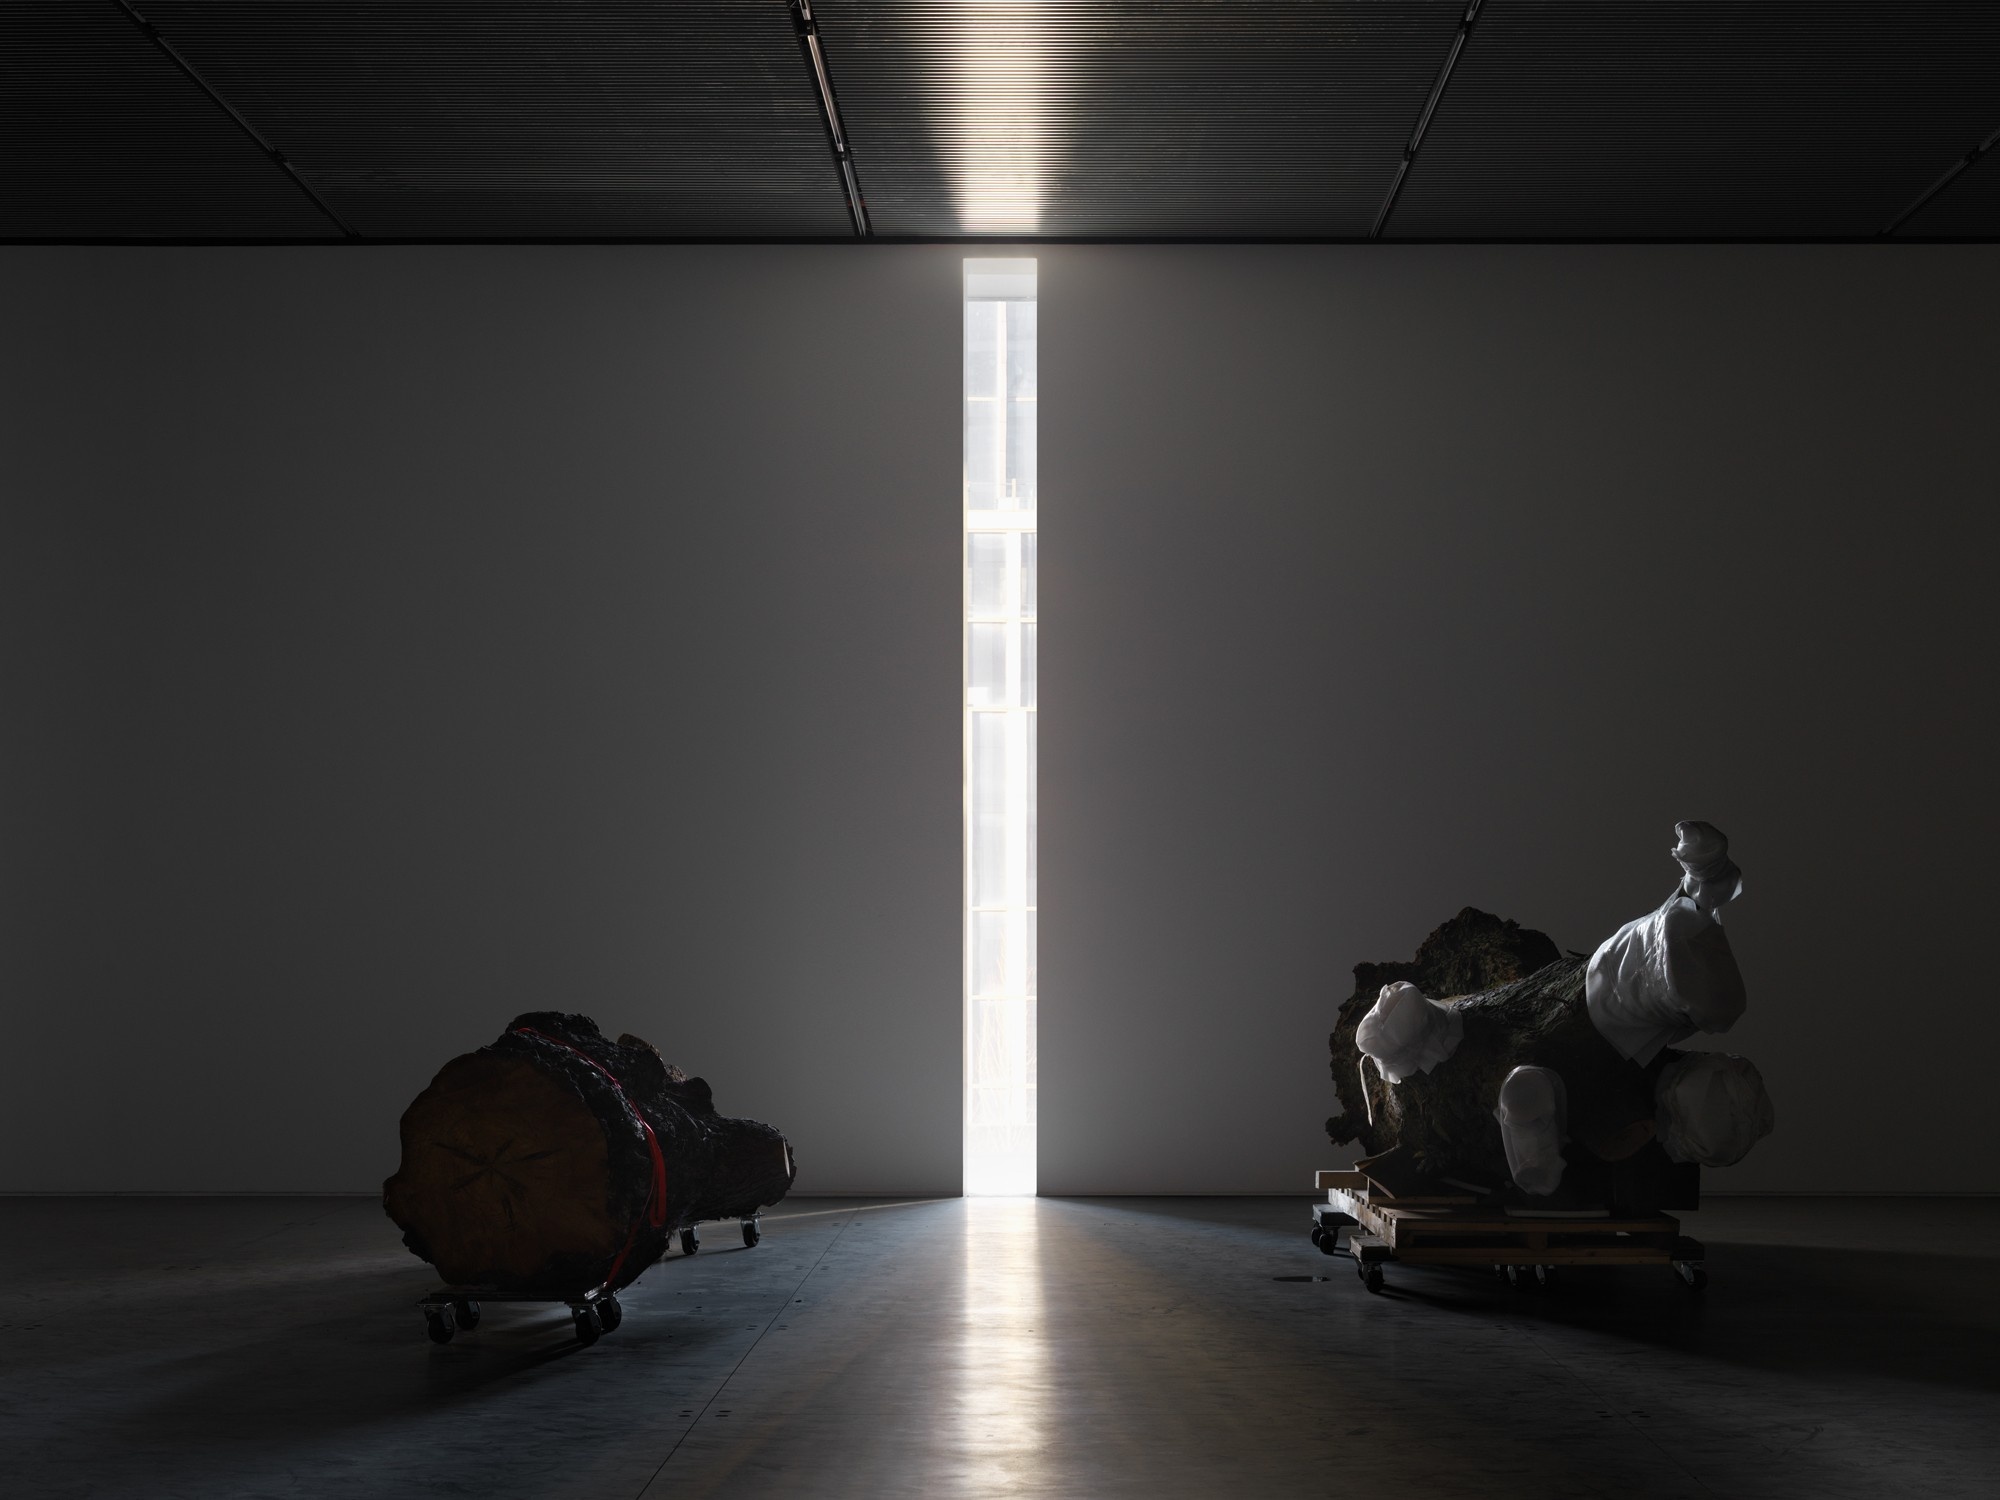 An Installation view of the exhibition Trisha Donnelly showing two trees on either side of a wall cut out to let in a column of light into the gallery